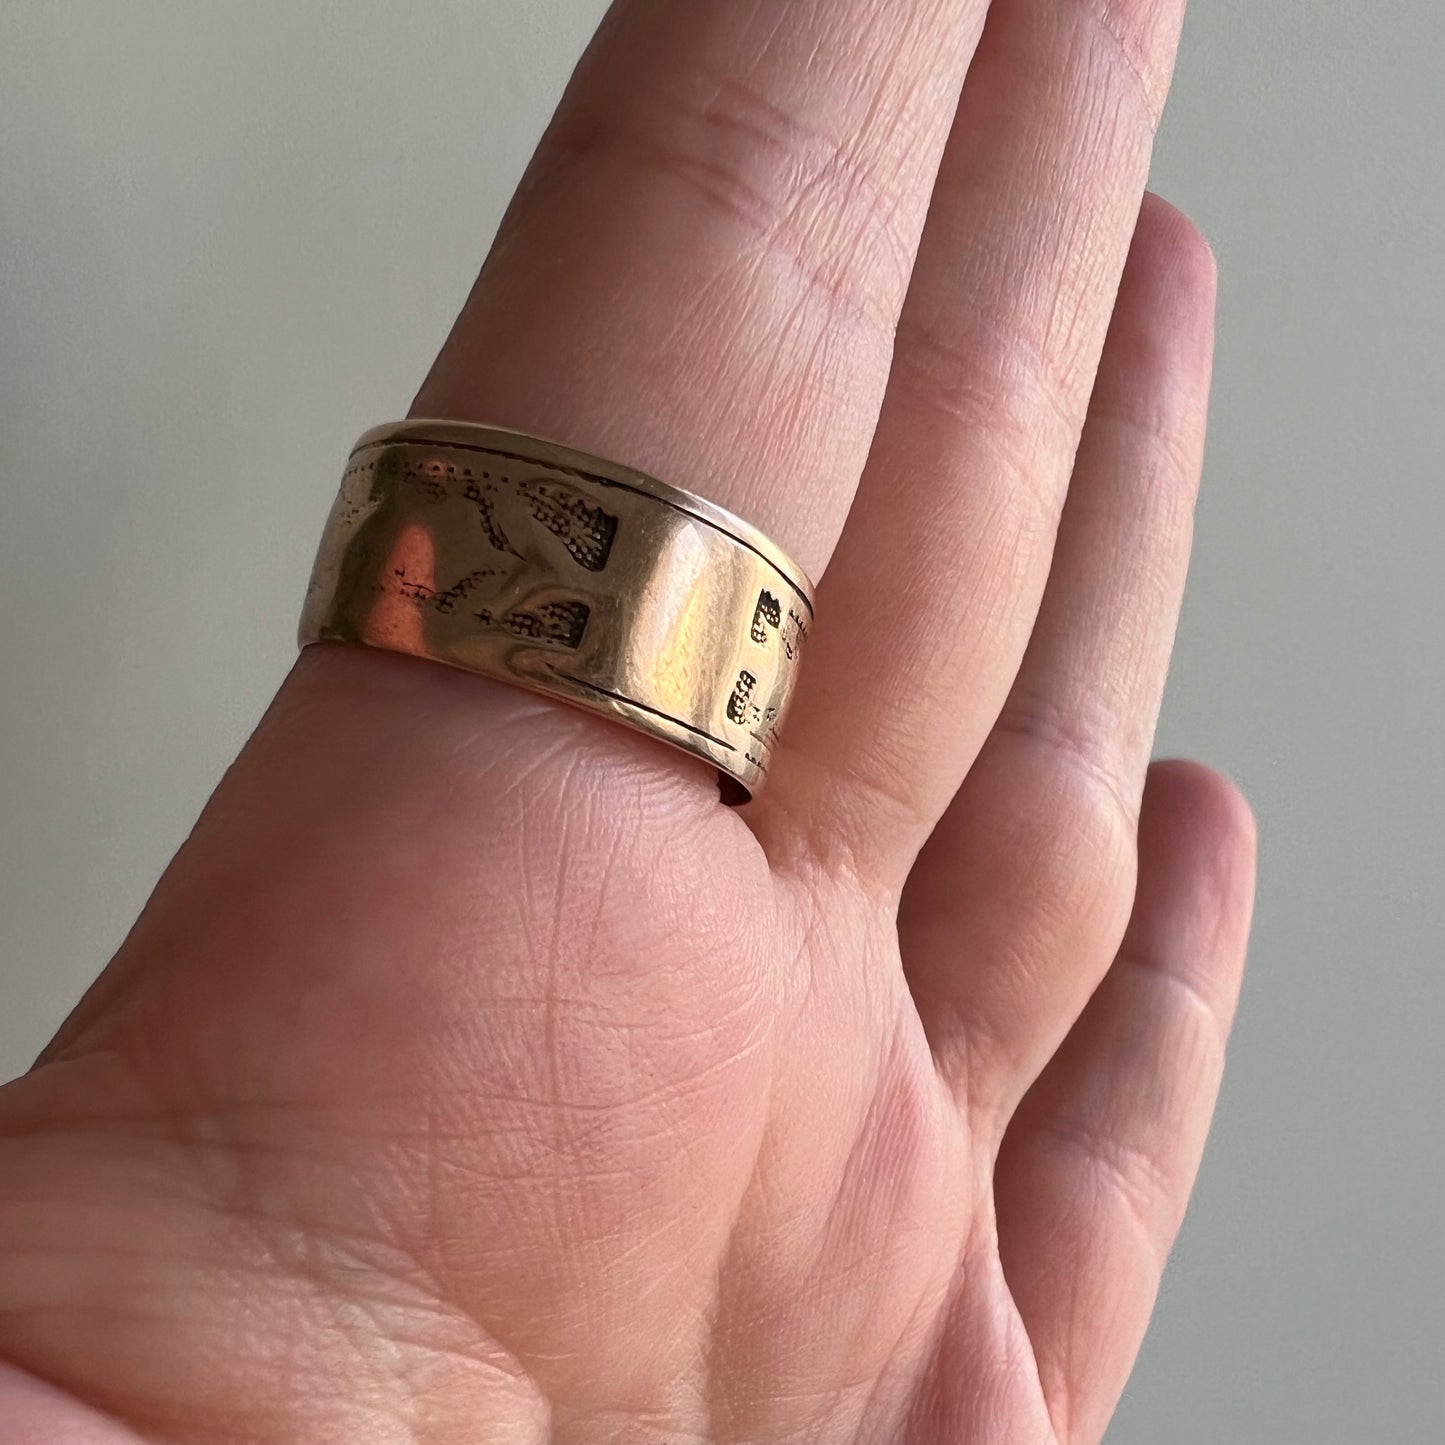 A N T I Q U E // seasons past / 10k rosy yellow gold wide band / size 8 to 8.25 but fits smaller because it's 9mm wide